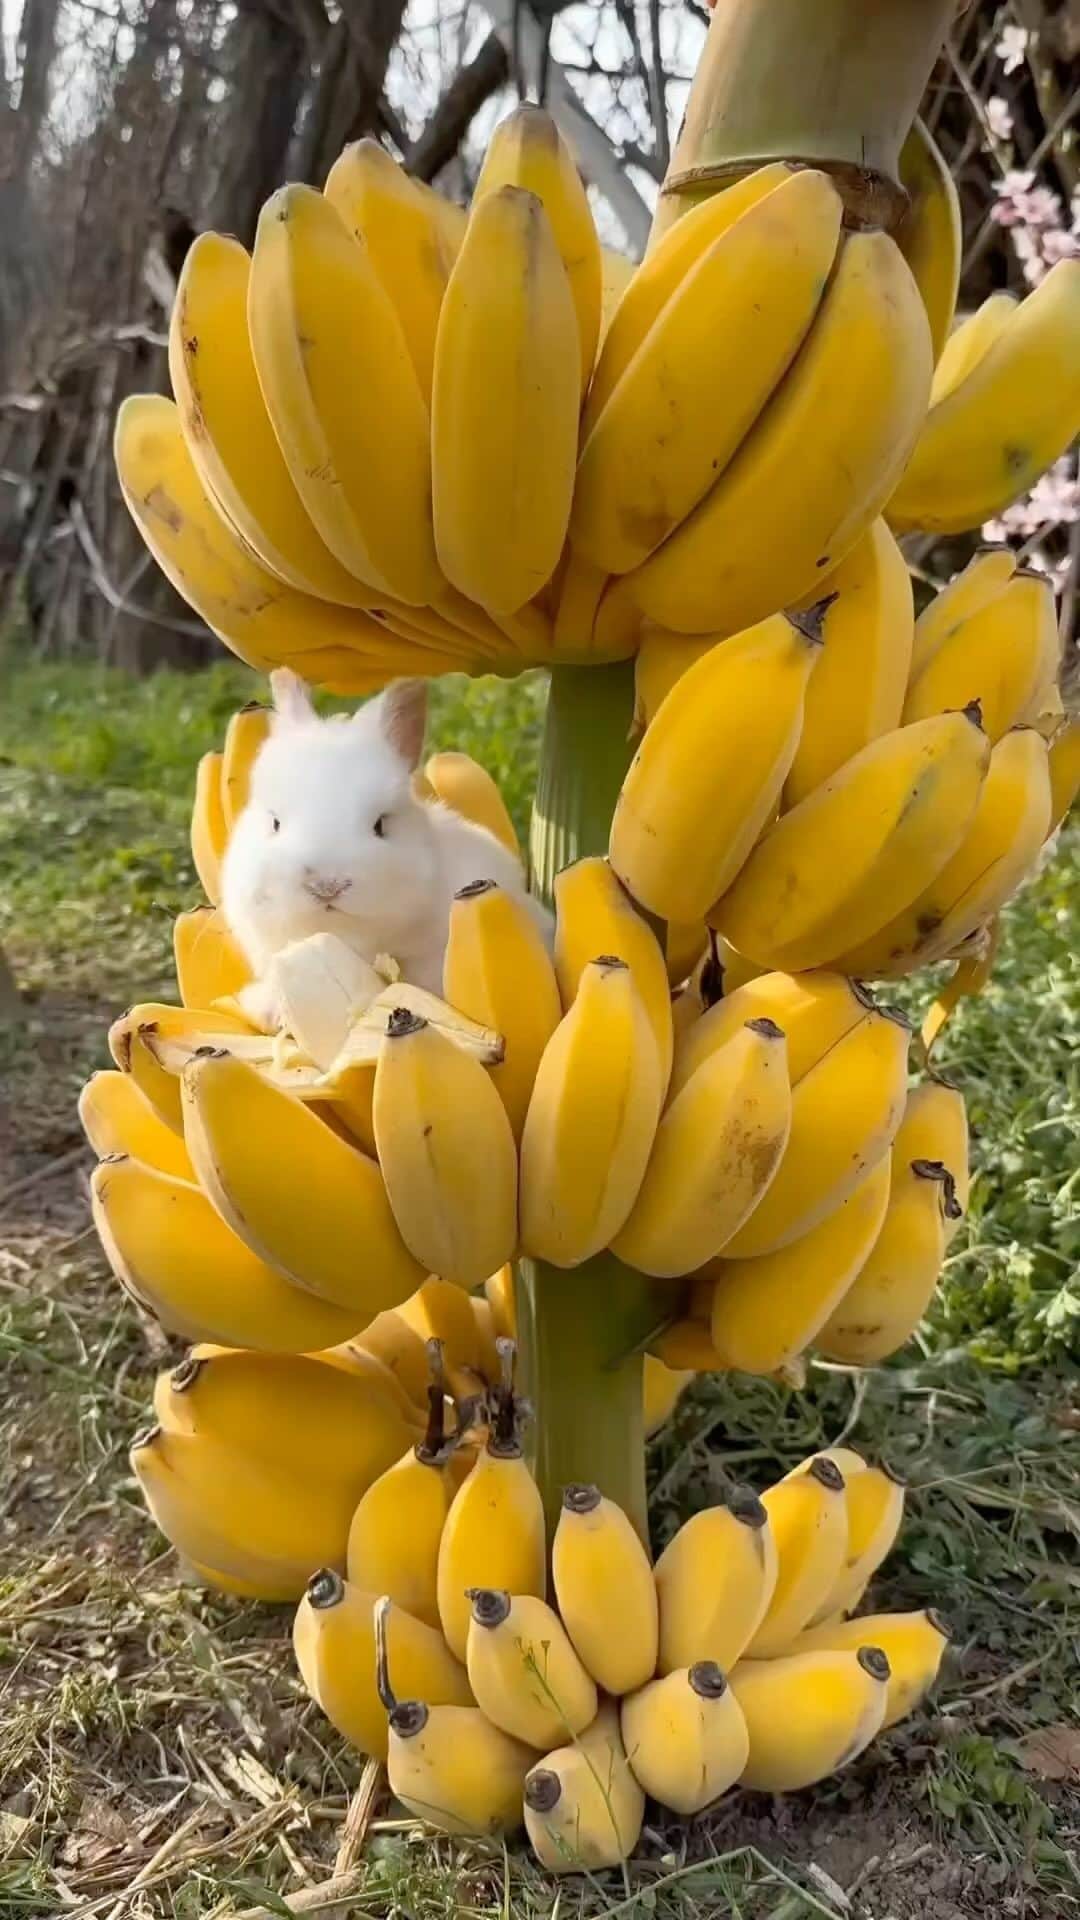 Cute baby animal videos picsのインスタグラム：「So adorable 🥹🍌 Song : YOU AND ME @bigsteppadrew check it out  - - Follow us @cutie.animals.page for more !! 💙 - - Credit 📸 @nature._.videos DM for removal)🙏🏻 - - #animals #nature #animal #pets #love #cute #wildlife #pet #cats #dog #photography #dogs #instagram #cat #naturephotography #of #photooftheday #dogsofinstagram #animallovers #wildlifephotography #petsofinstagram #birds #catsofinstagram #instagood #petstagram #art #animalsofinstagram #puppy #bird #bhfyp」